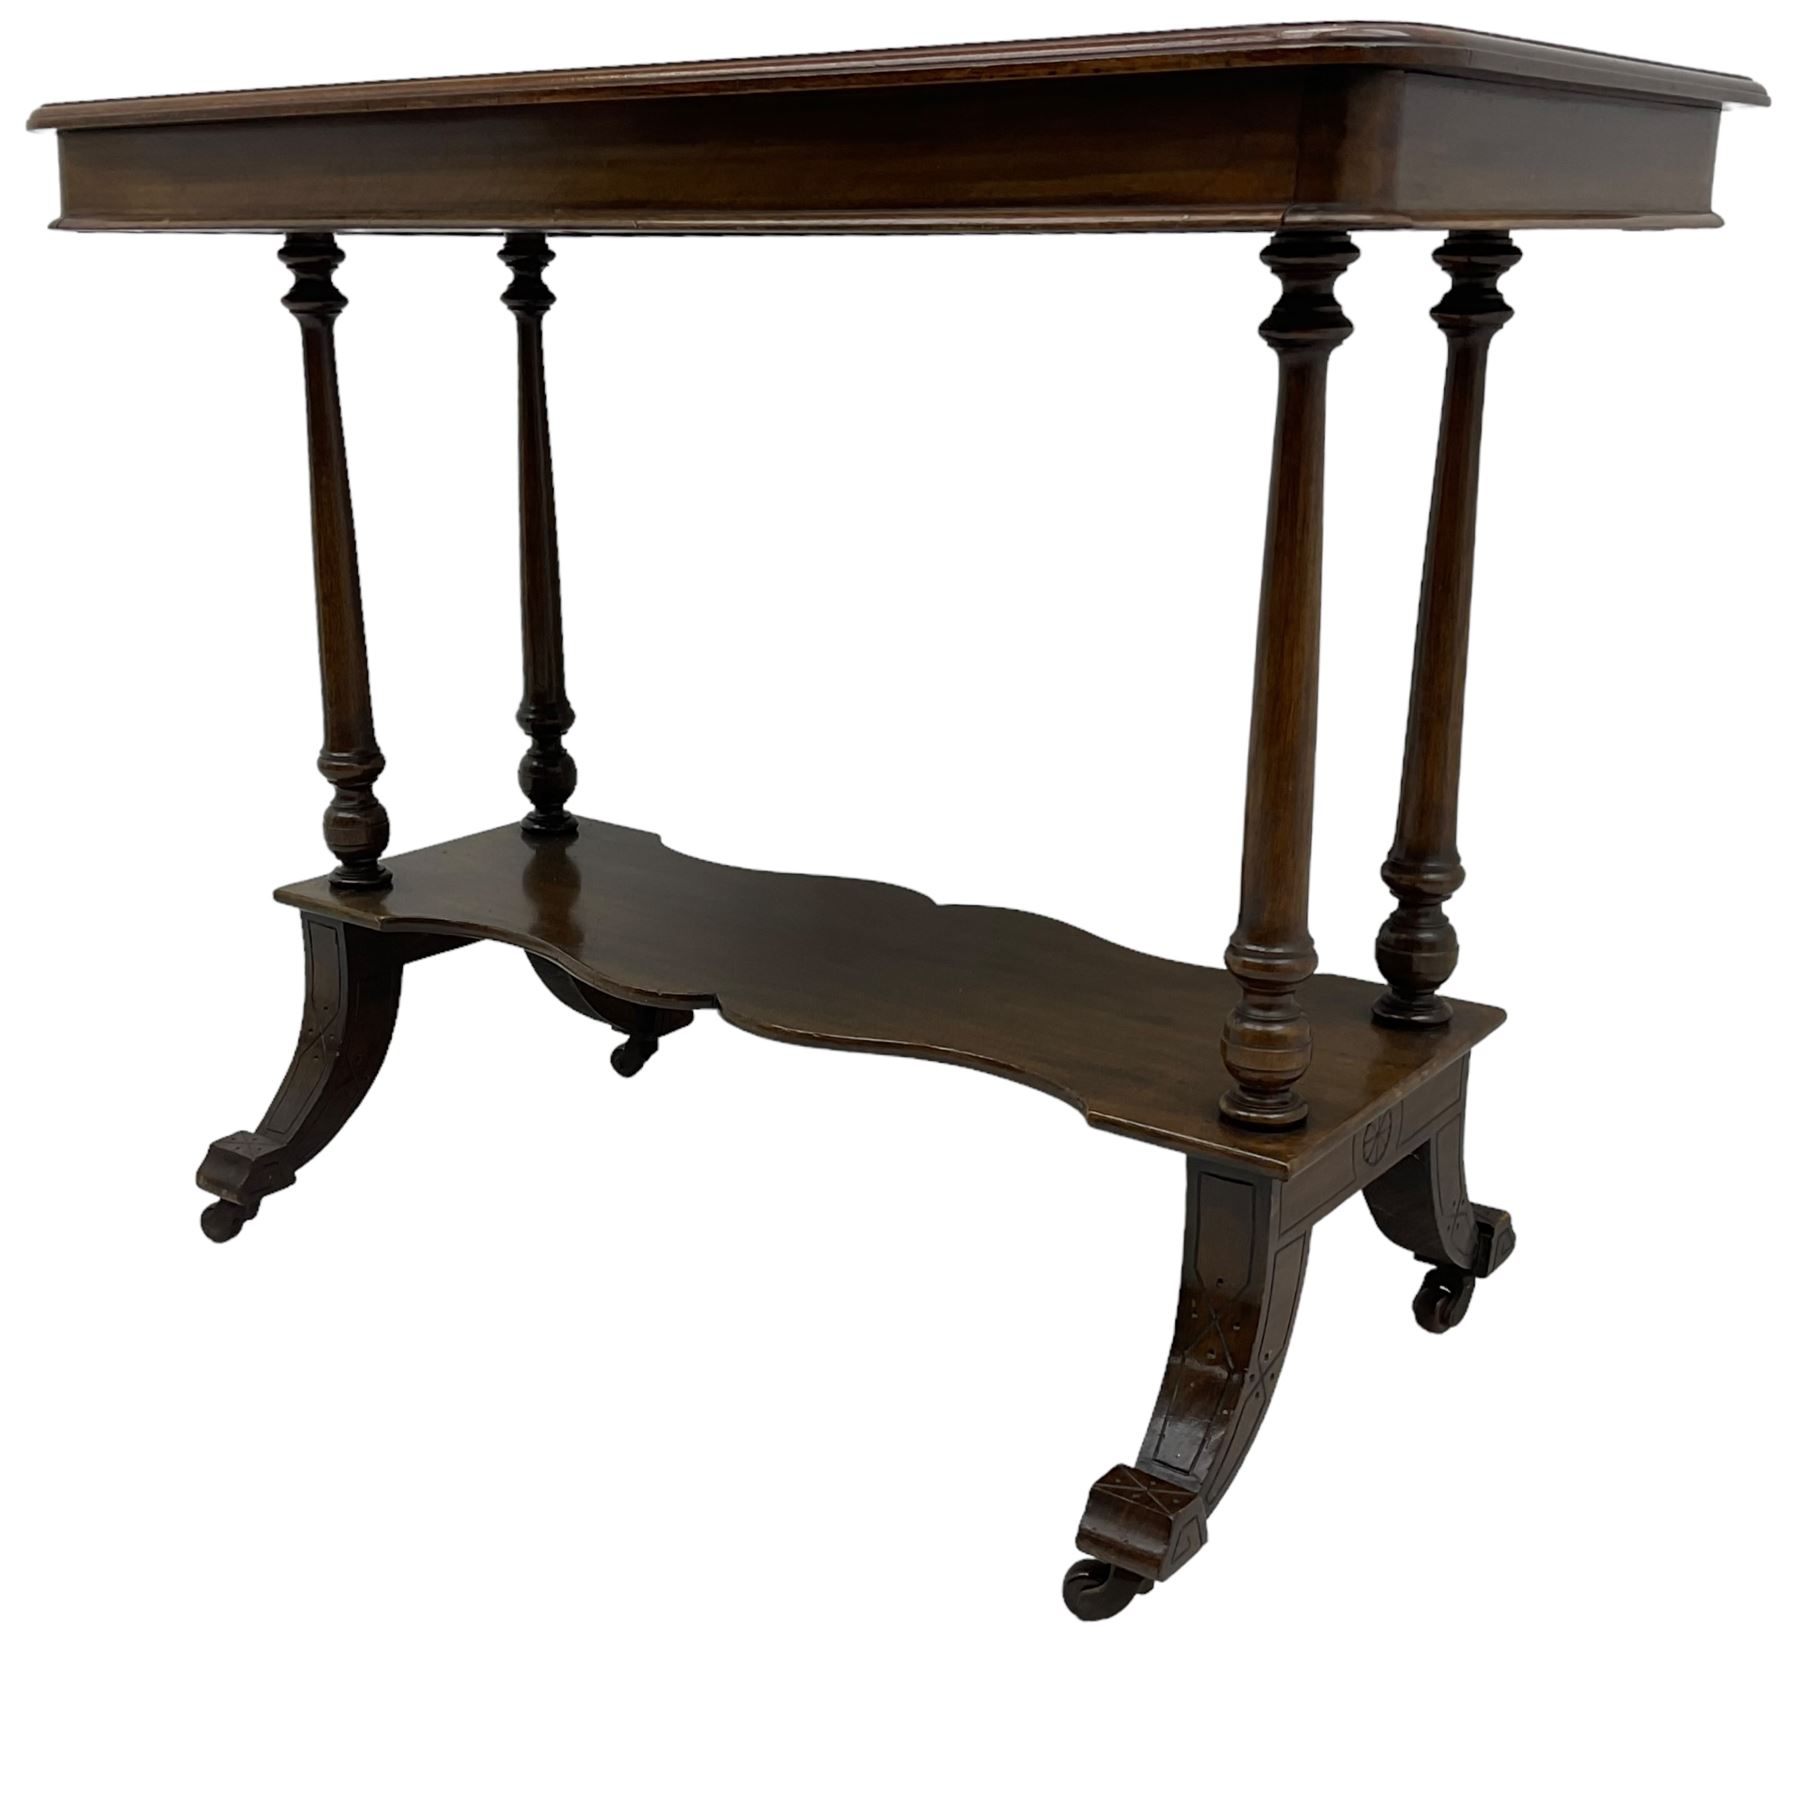 Late Victorian mahogany Aesthetic movement side table - Image 8 of 8